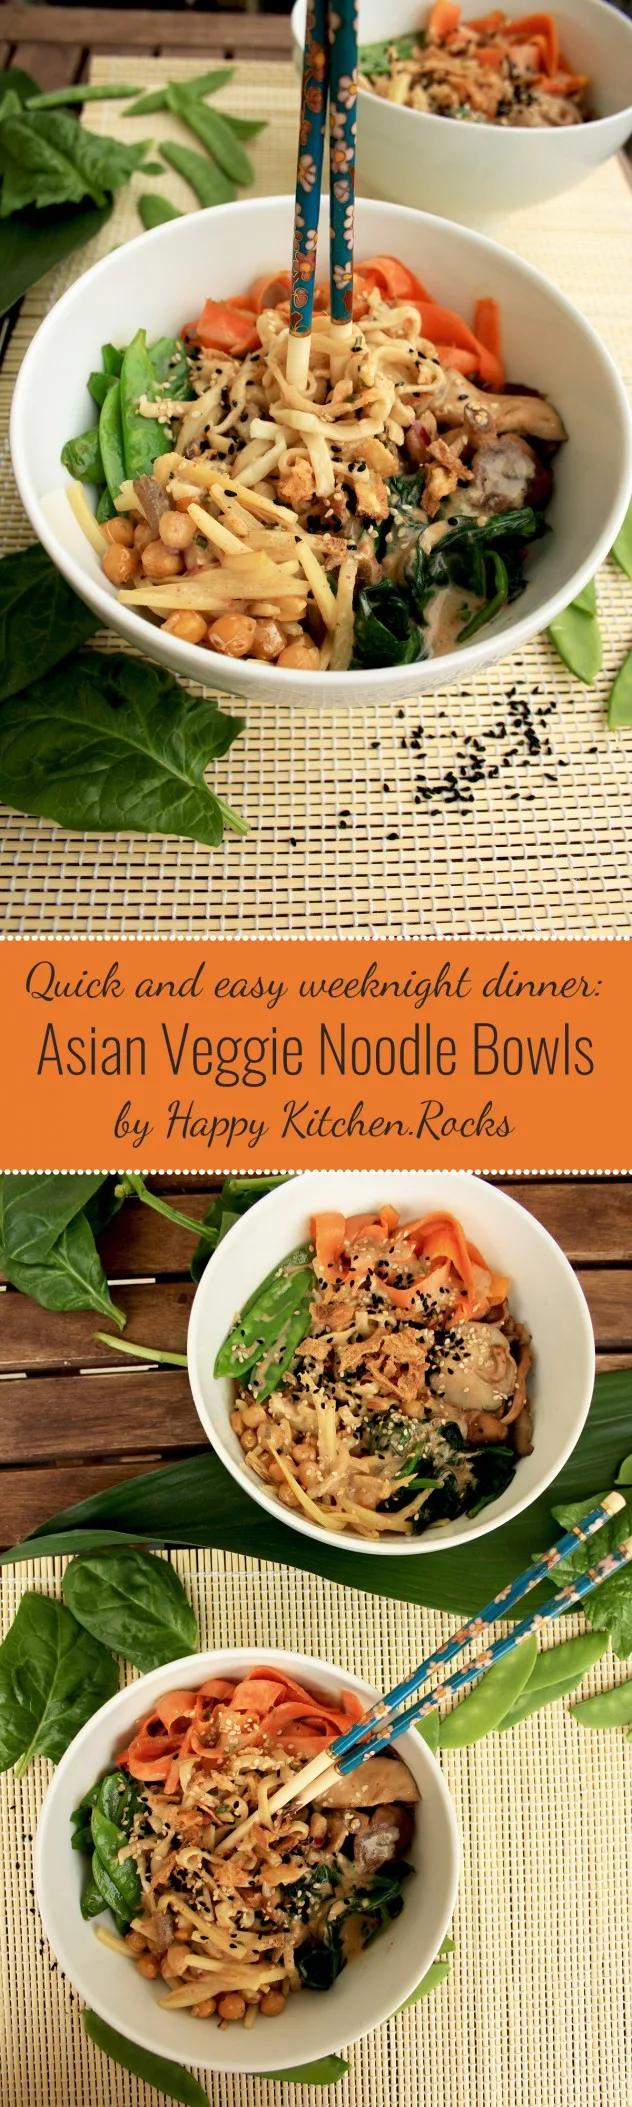 Asian Veggie Noodle Bowls: Veggie-packed flavorful dinner which is really quick to throw together and so much better than takeout! Use any veggies you like.